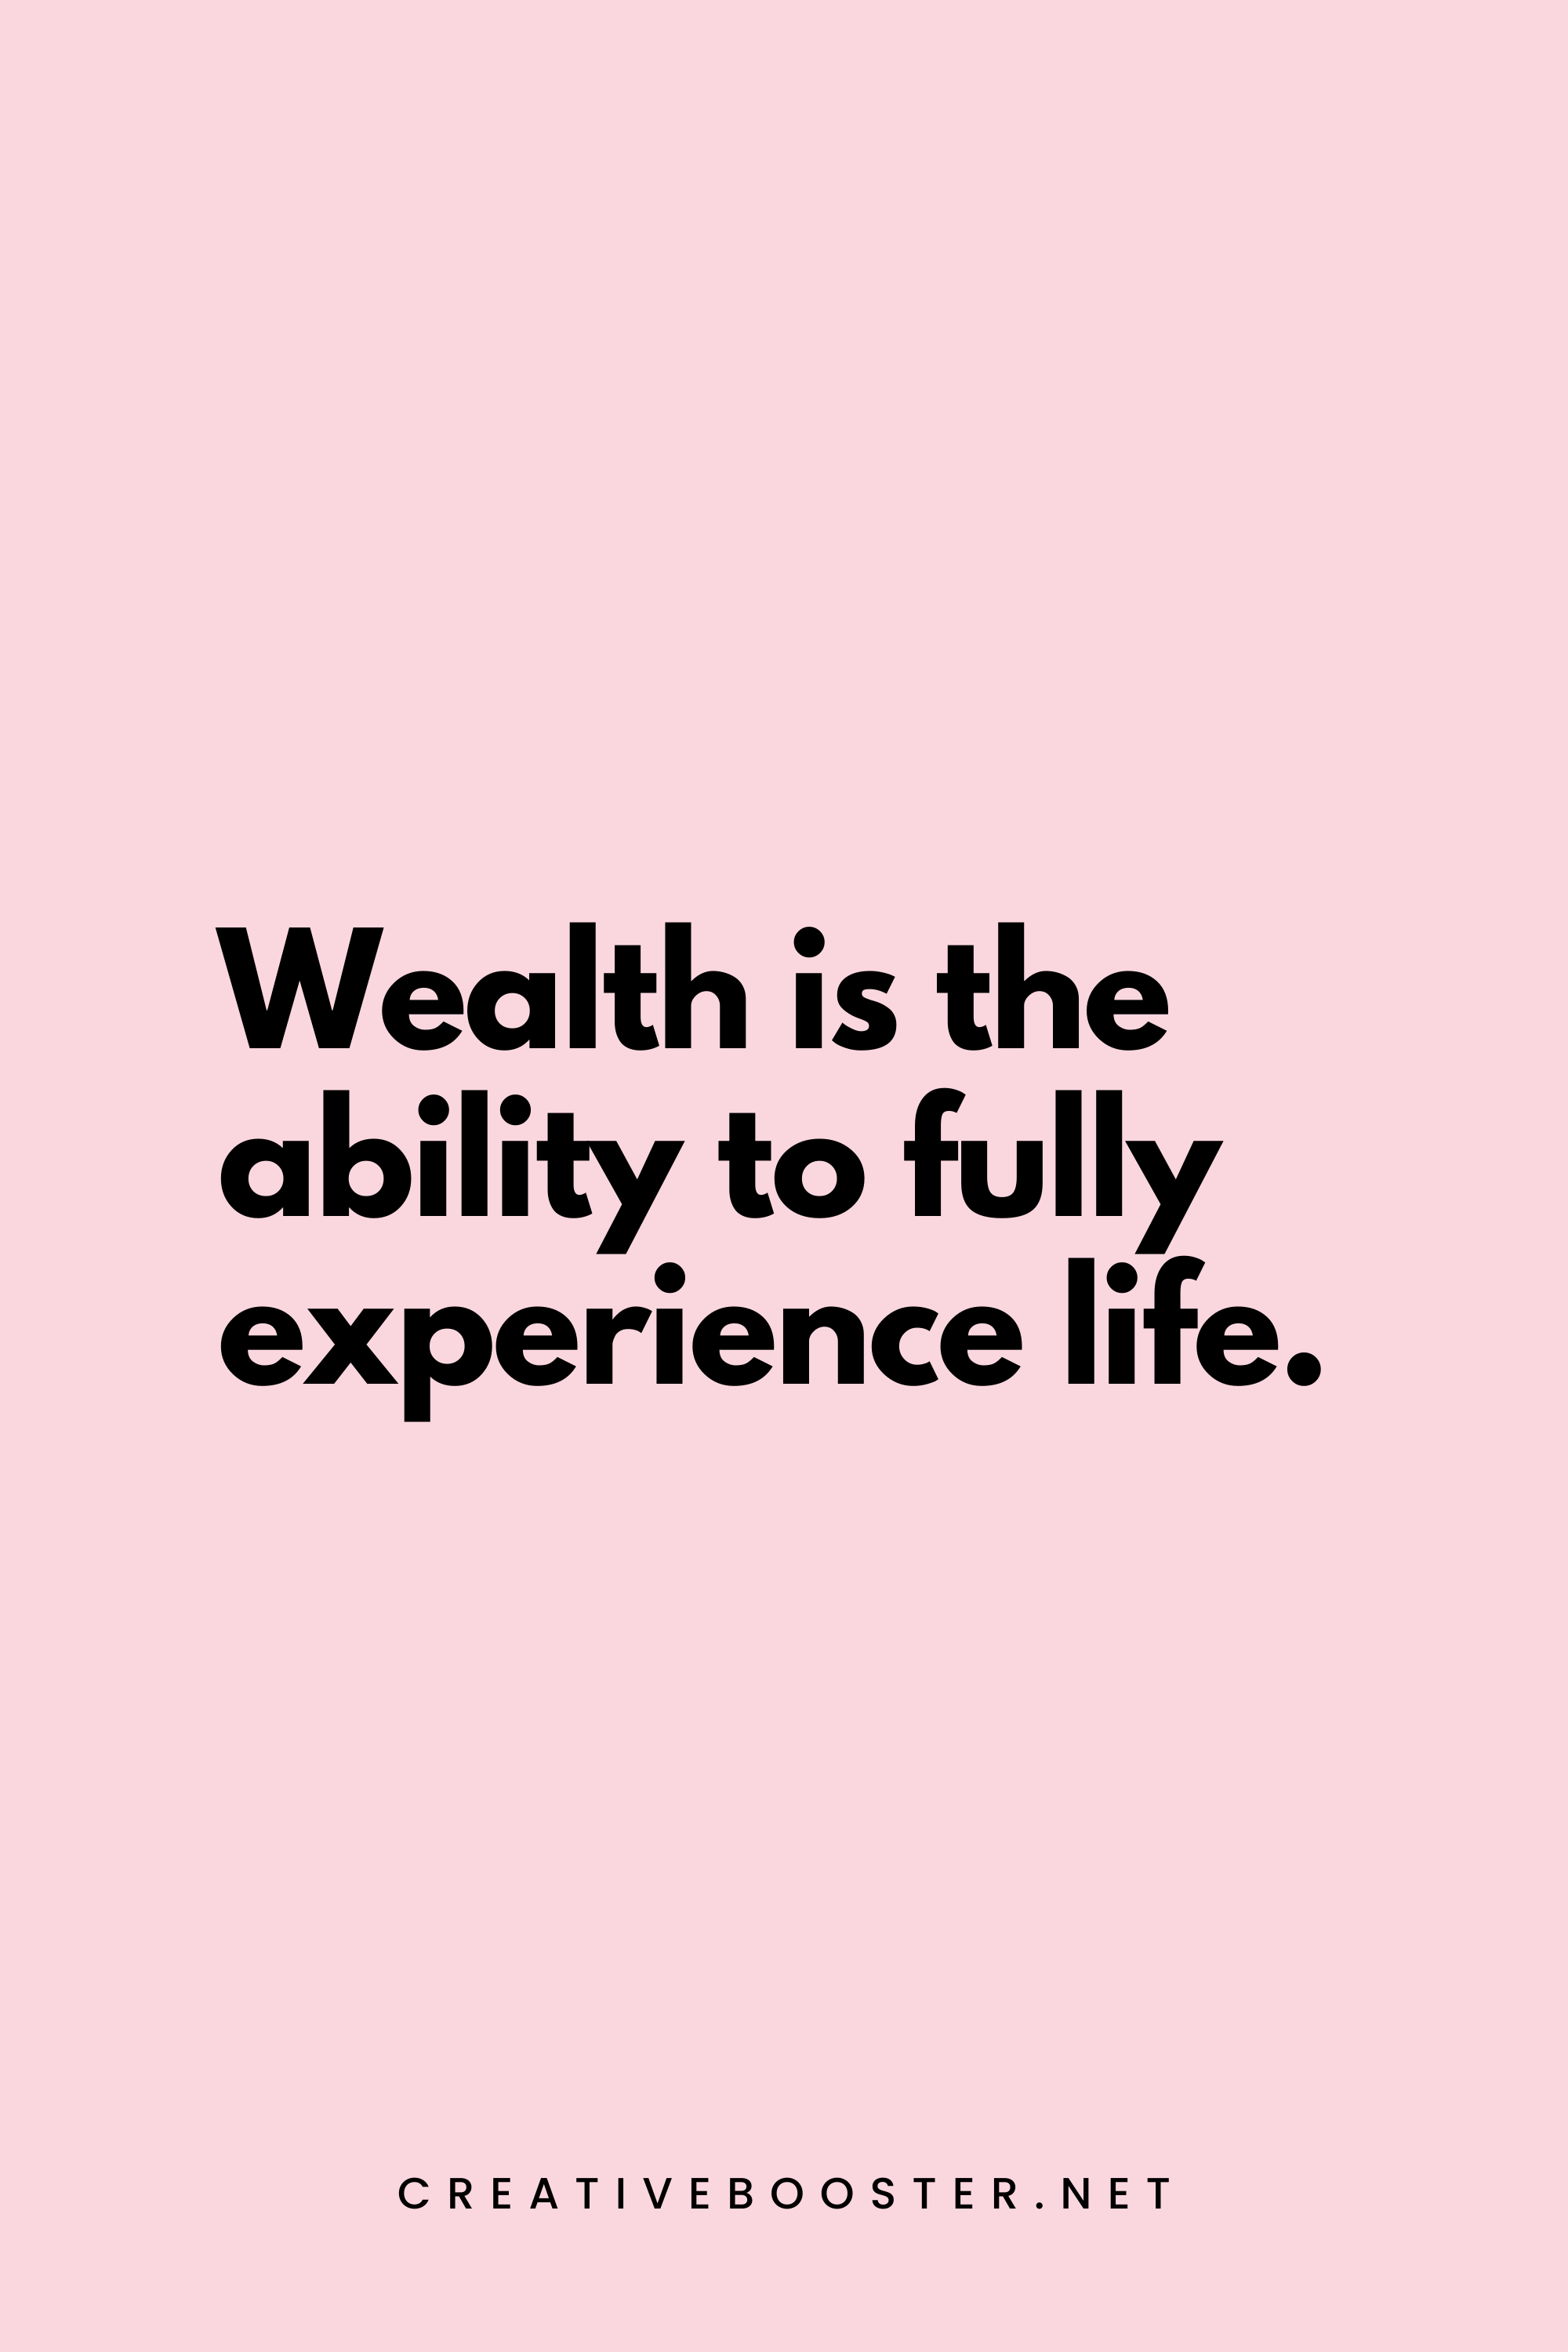 7. Wealth is the ability to fully experience life. - Henry David Thoreau - 1. Popular Financial Freedom Quotes